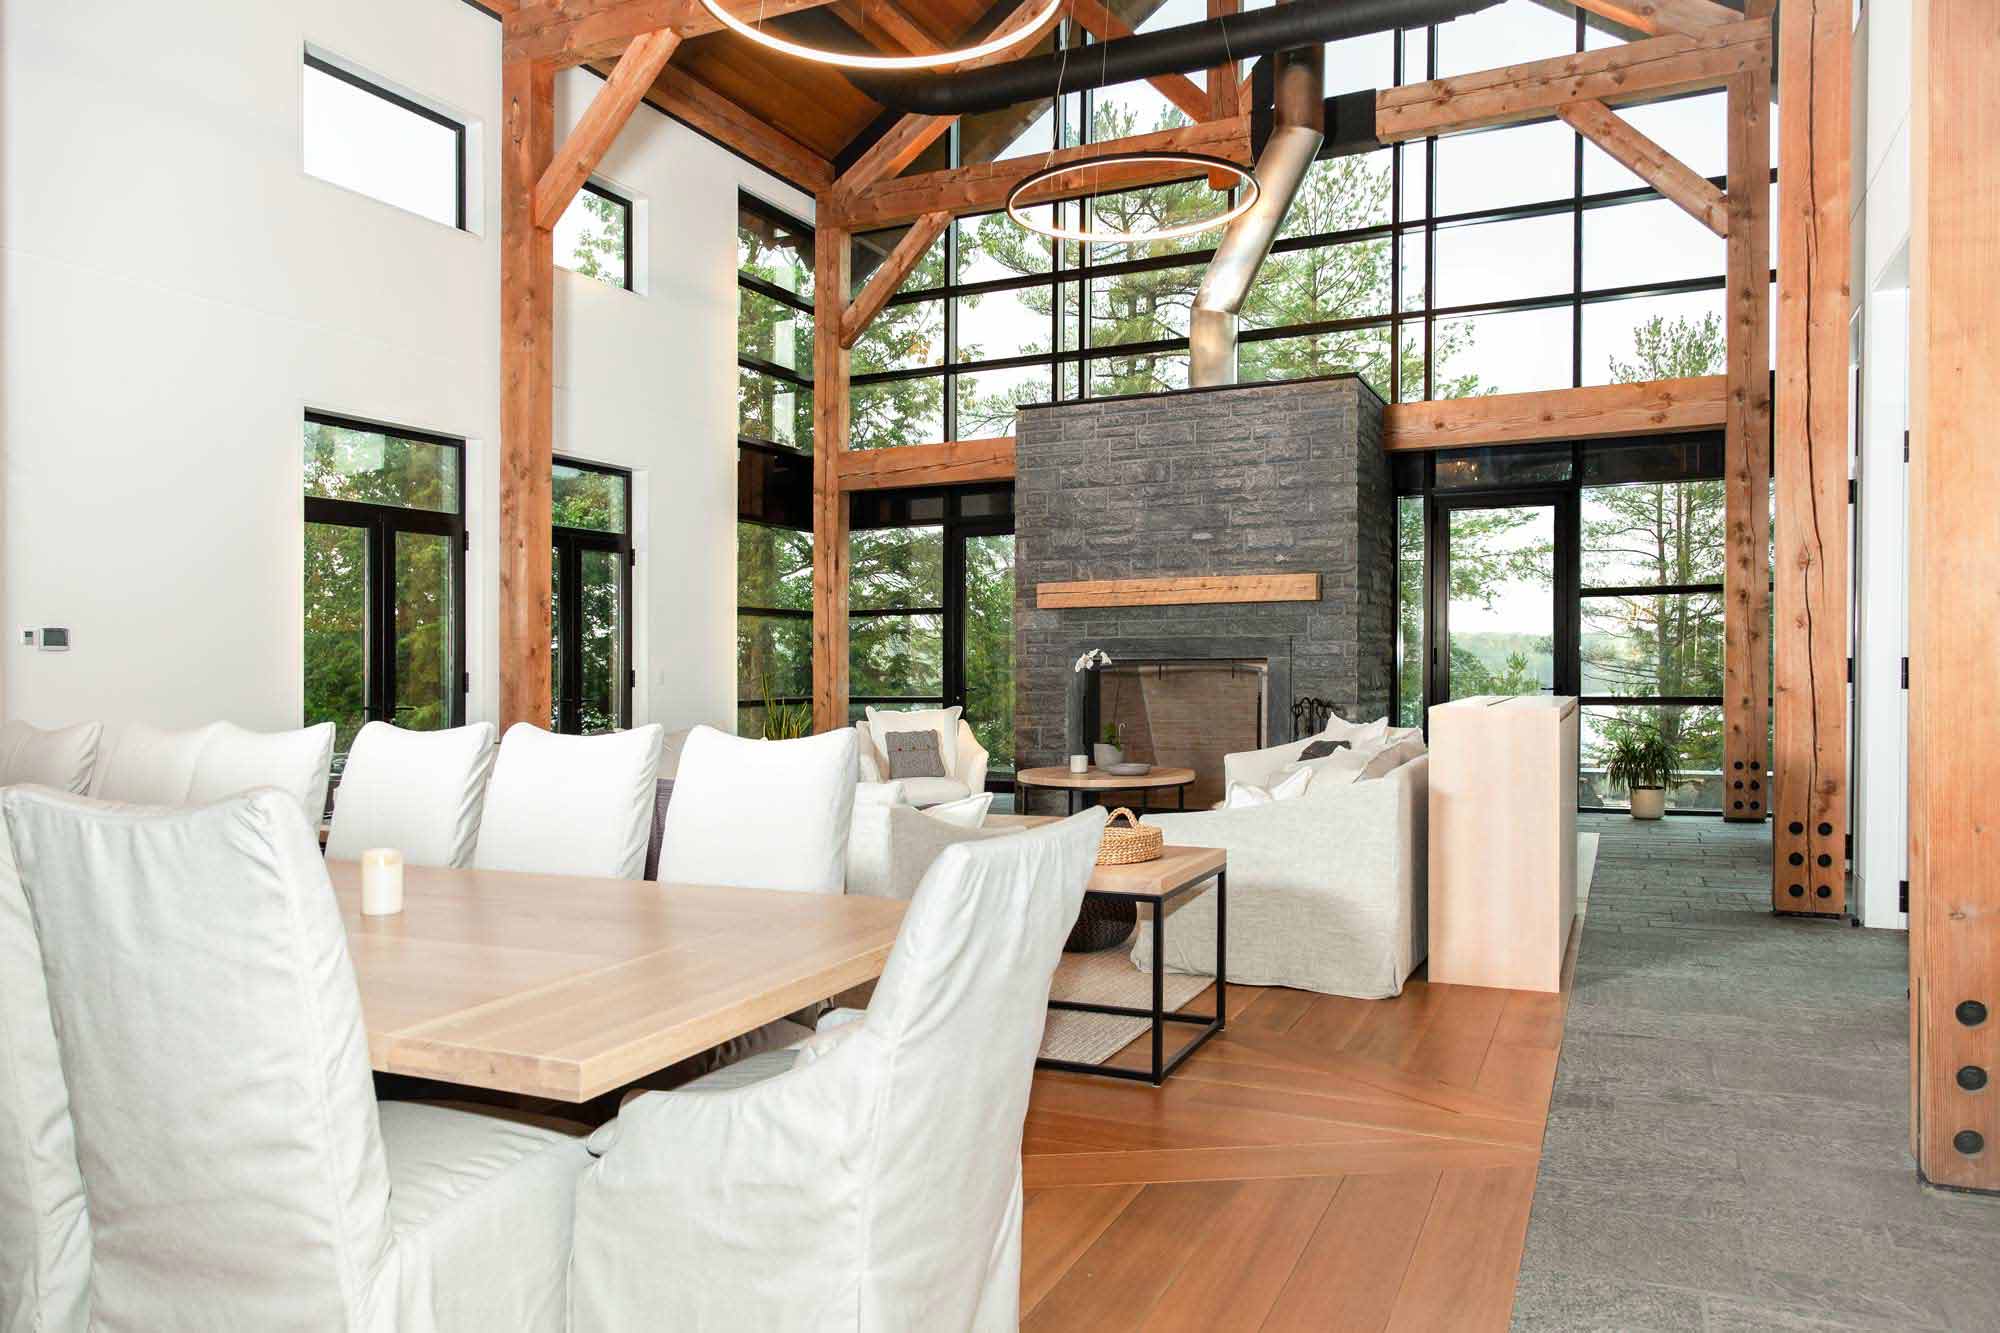 Contemporary and rustic create a perfect balance in this ‘modern barn’ retreat